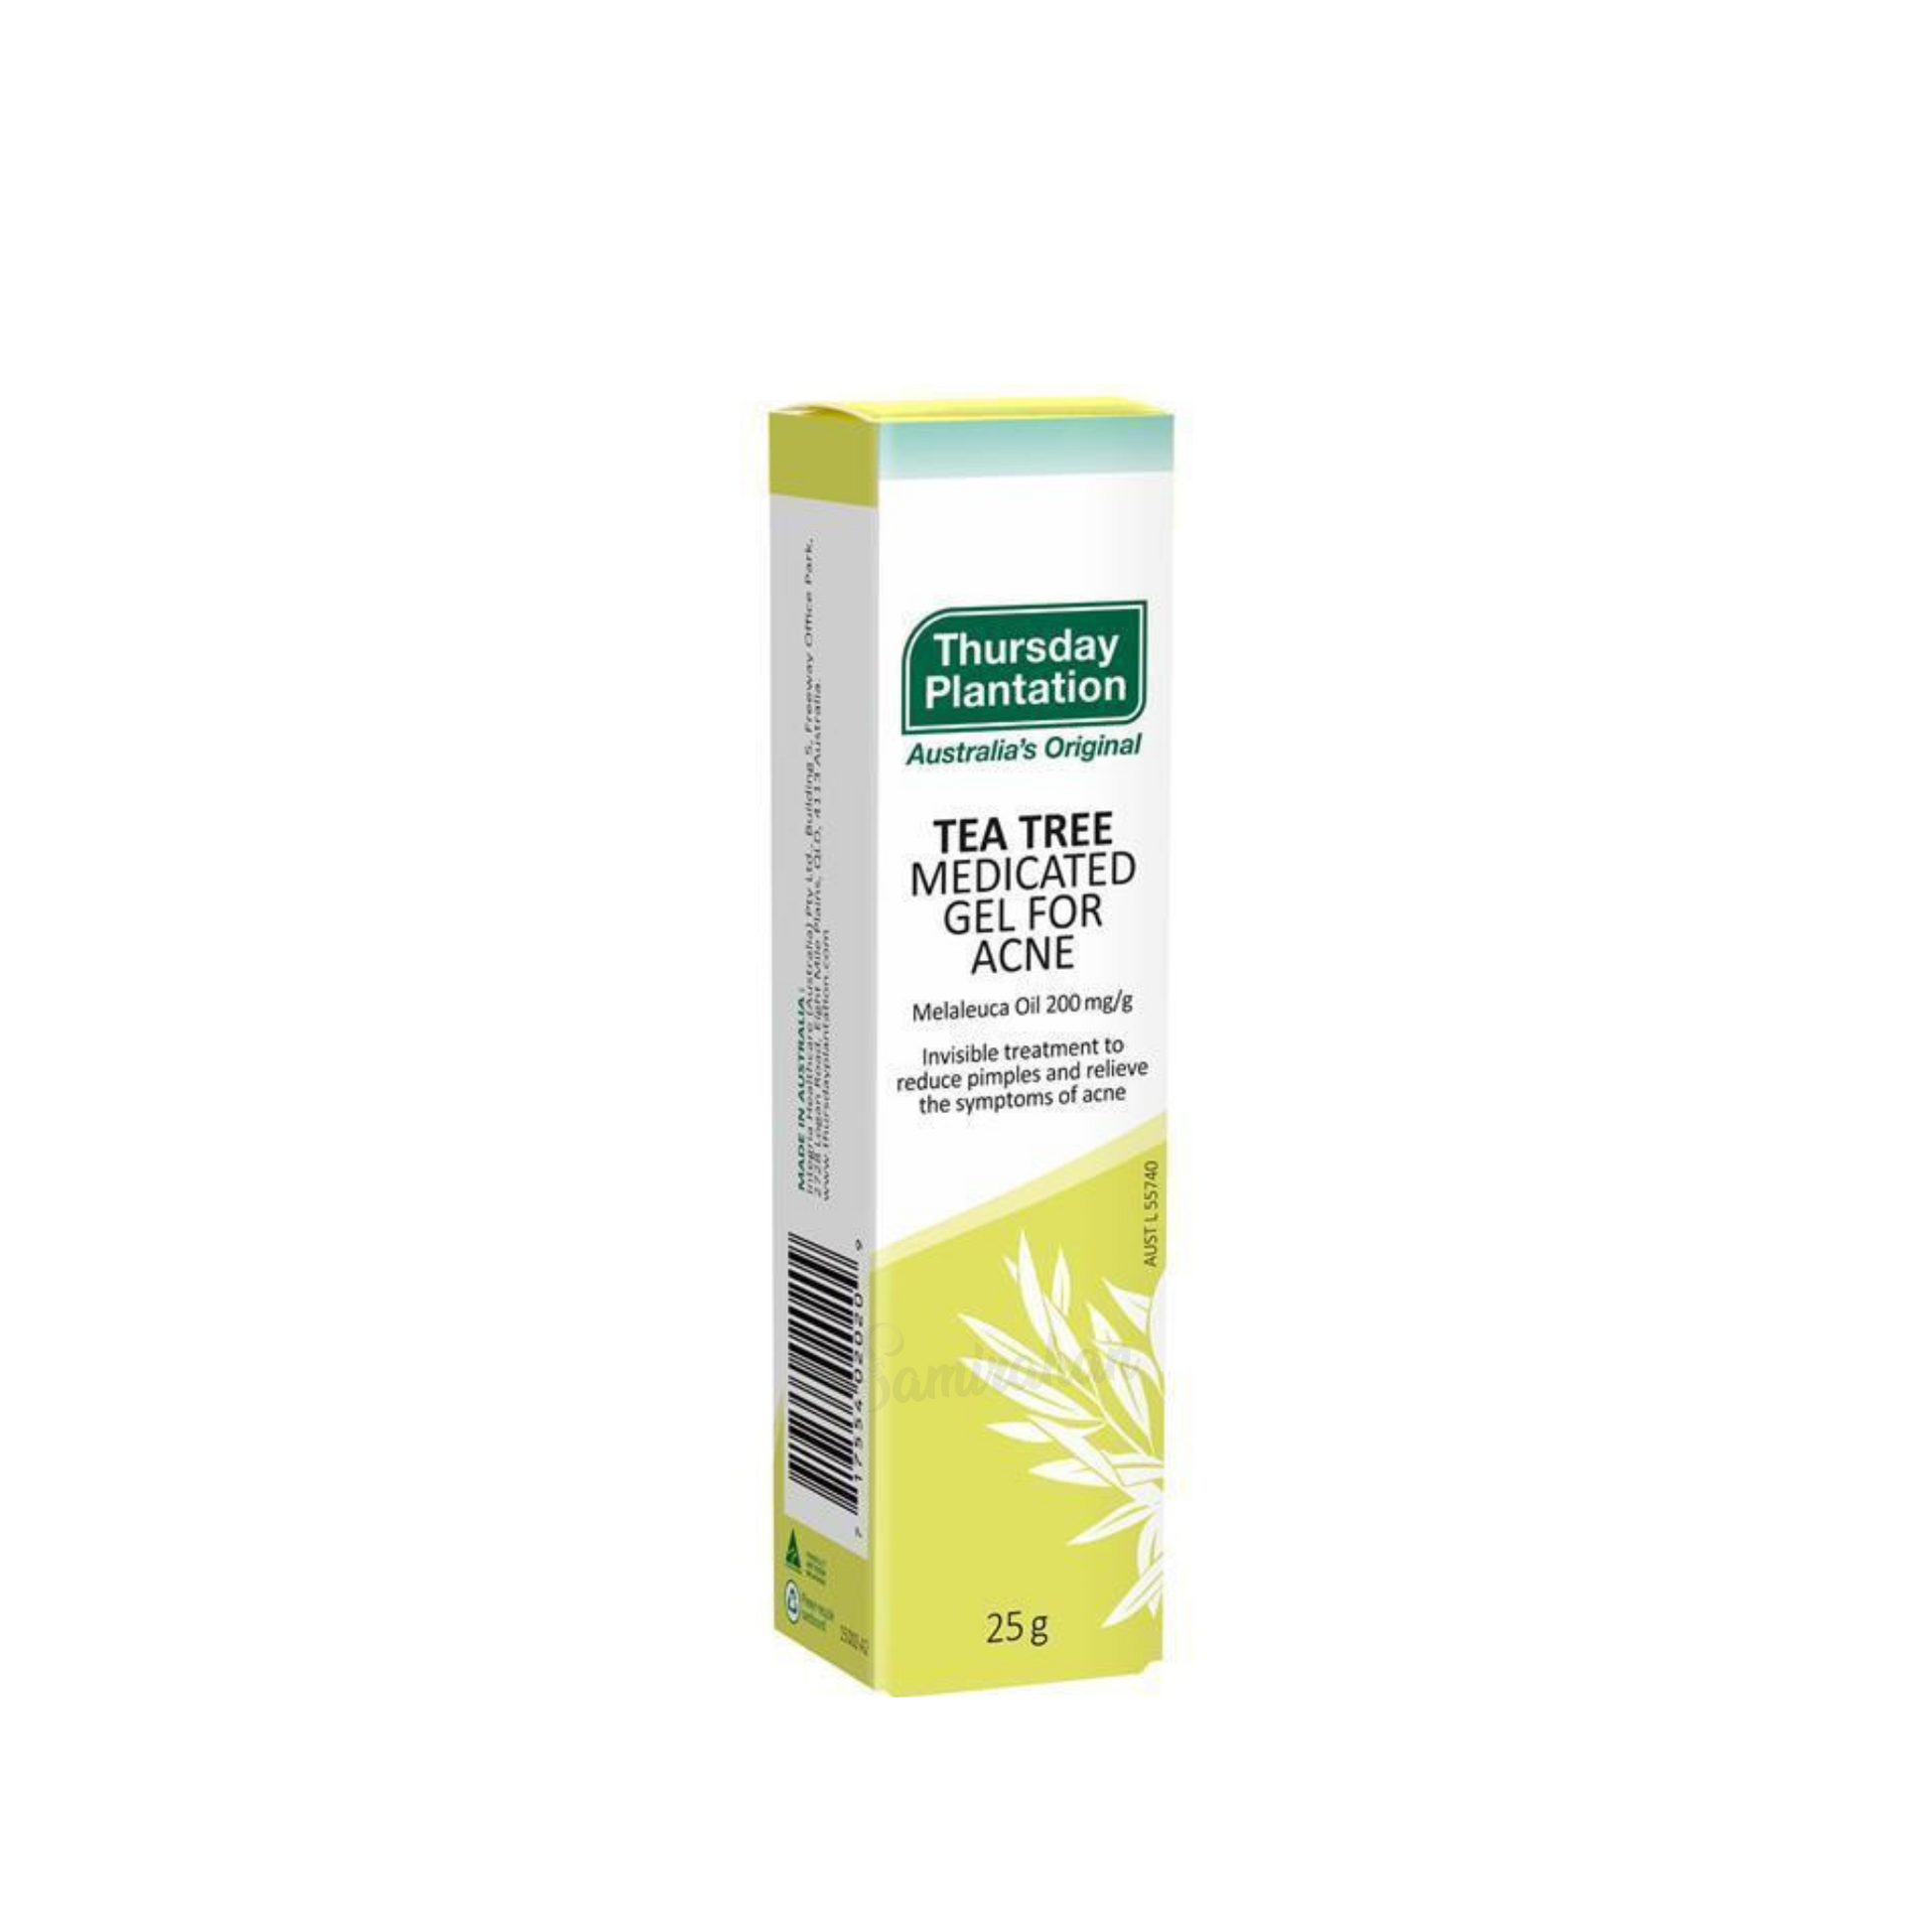 A photo of Thursday Plantation Tea Tree Medicated Gel for Acne which is a highly effective skincare gel treatment that penetrates deep into skin & helps dry out acne & pimples, reducing blackheads. Contains 100% pure Australian Tee Tea Oil which is a natural antibacterial ingredient. Best acne & pimple treatment in Dhaka, Bangladesh.